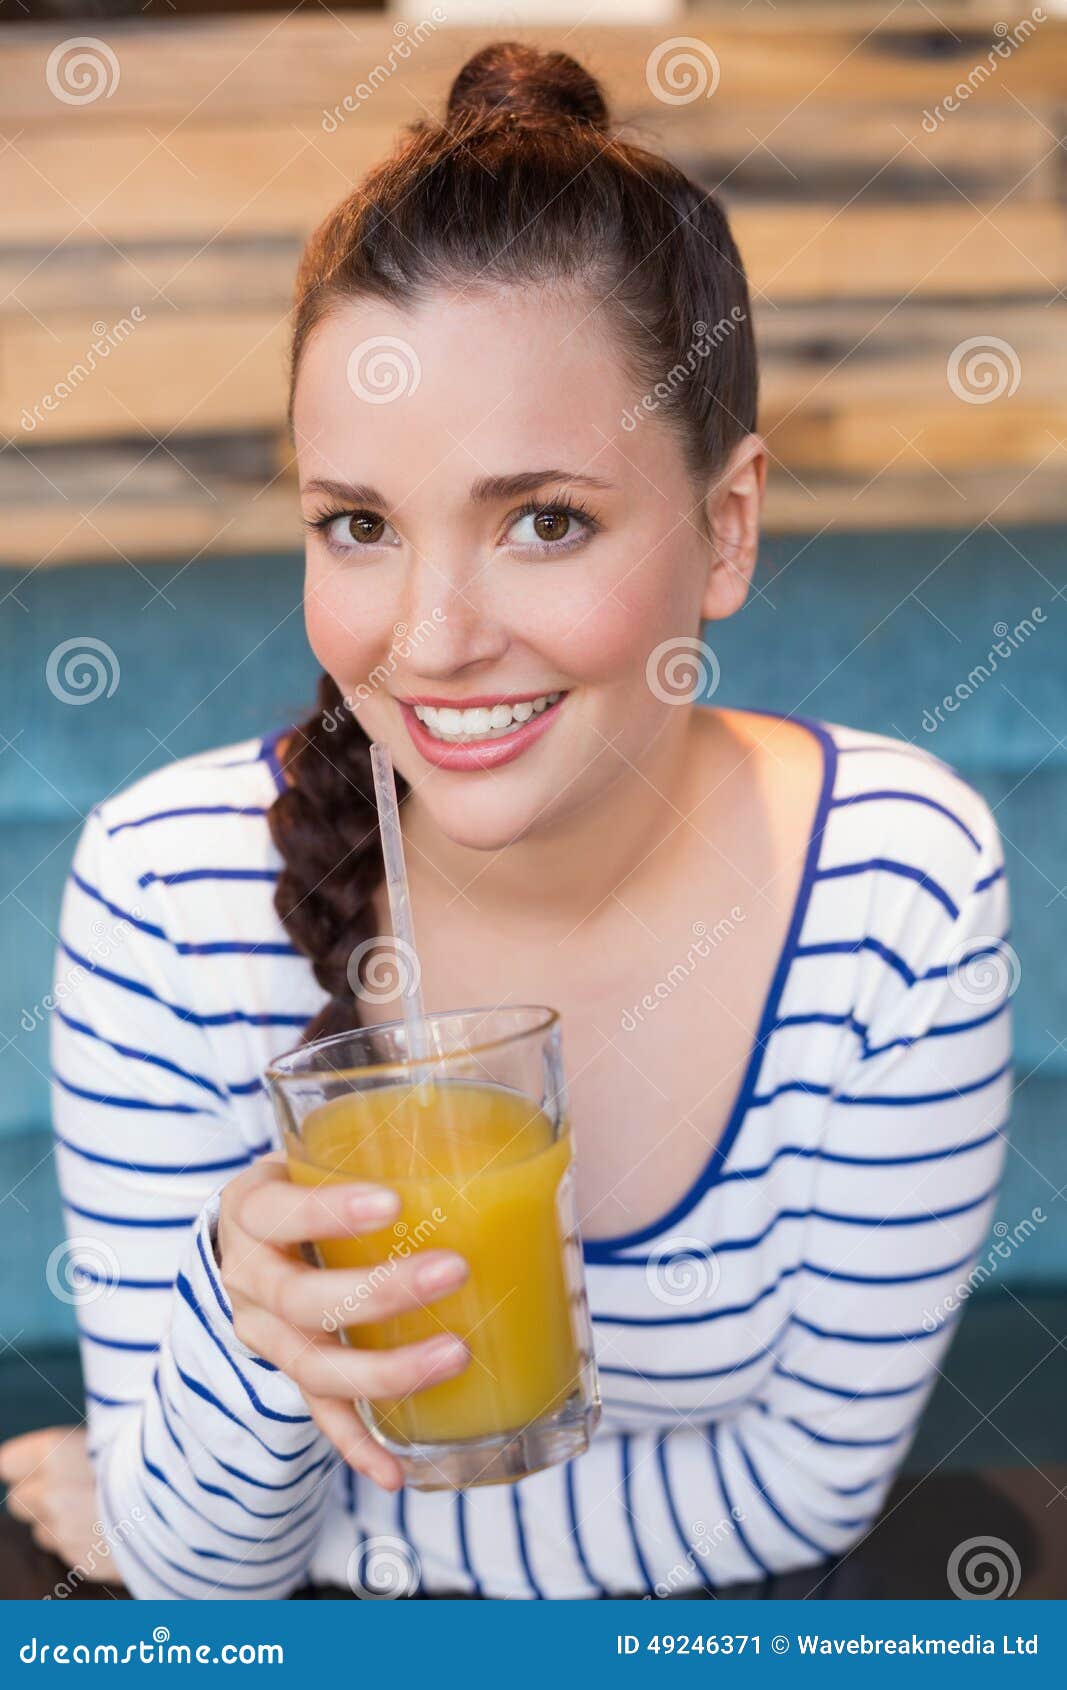 Young Woman Having Glass of Orange Juice Stock Image - Image of cafe ...